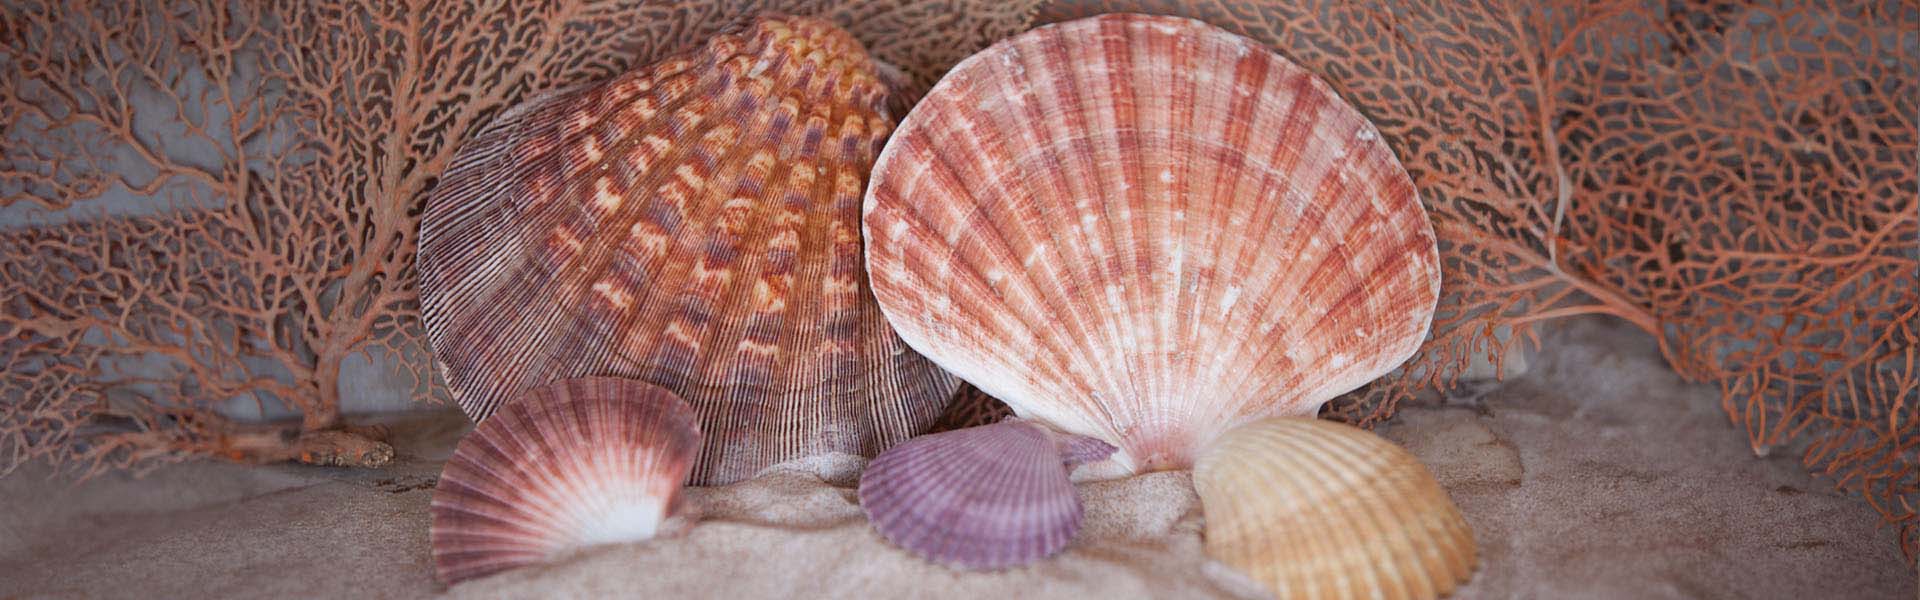 Mixed South Sea Shells For sale as Framed Prints, Photos, Wall Art and  Photo Gifts